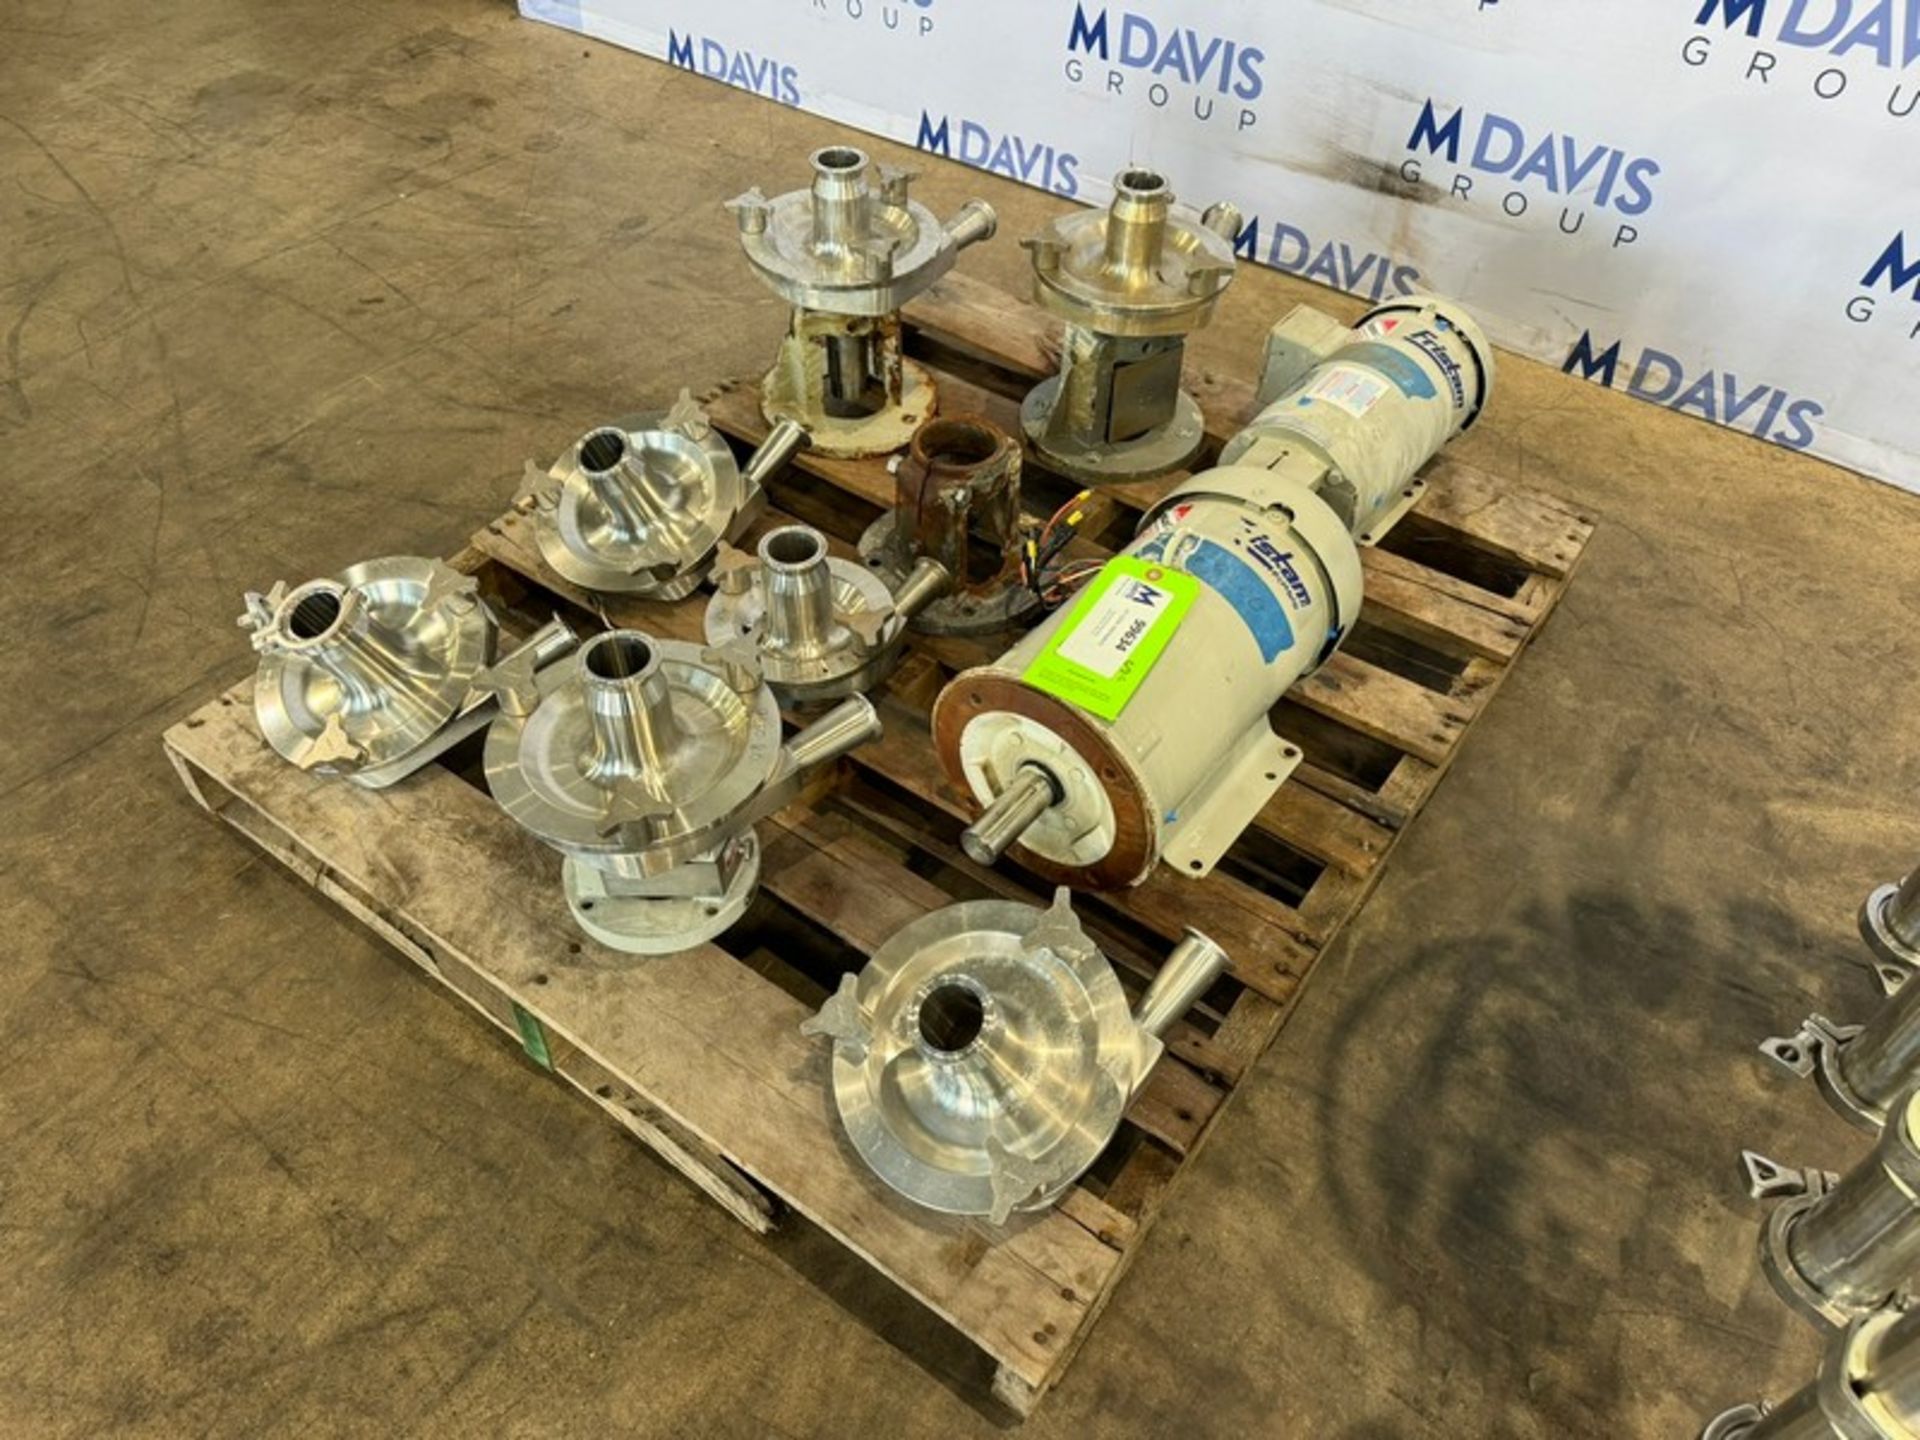 Pallet of Fristam S/S Pump Heads, Includes (2) Baldor 7.5 hp Motors, S/S Head Ranging from Aprox. 2"